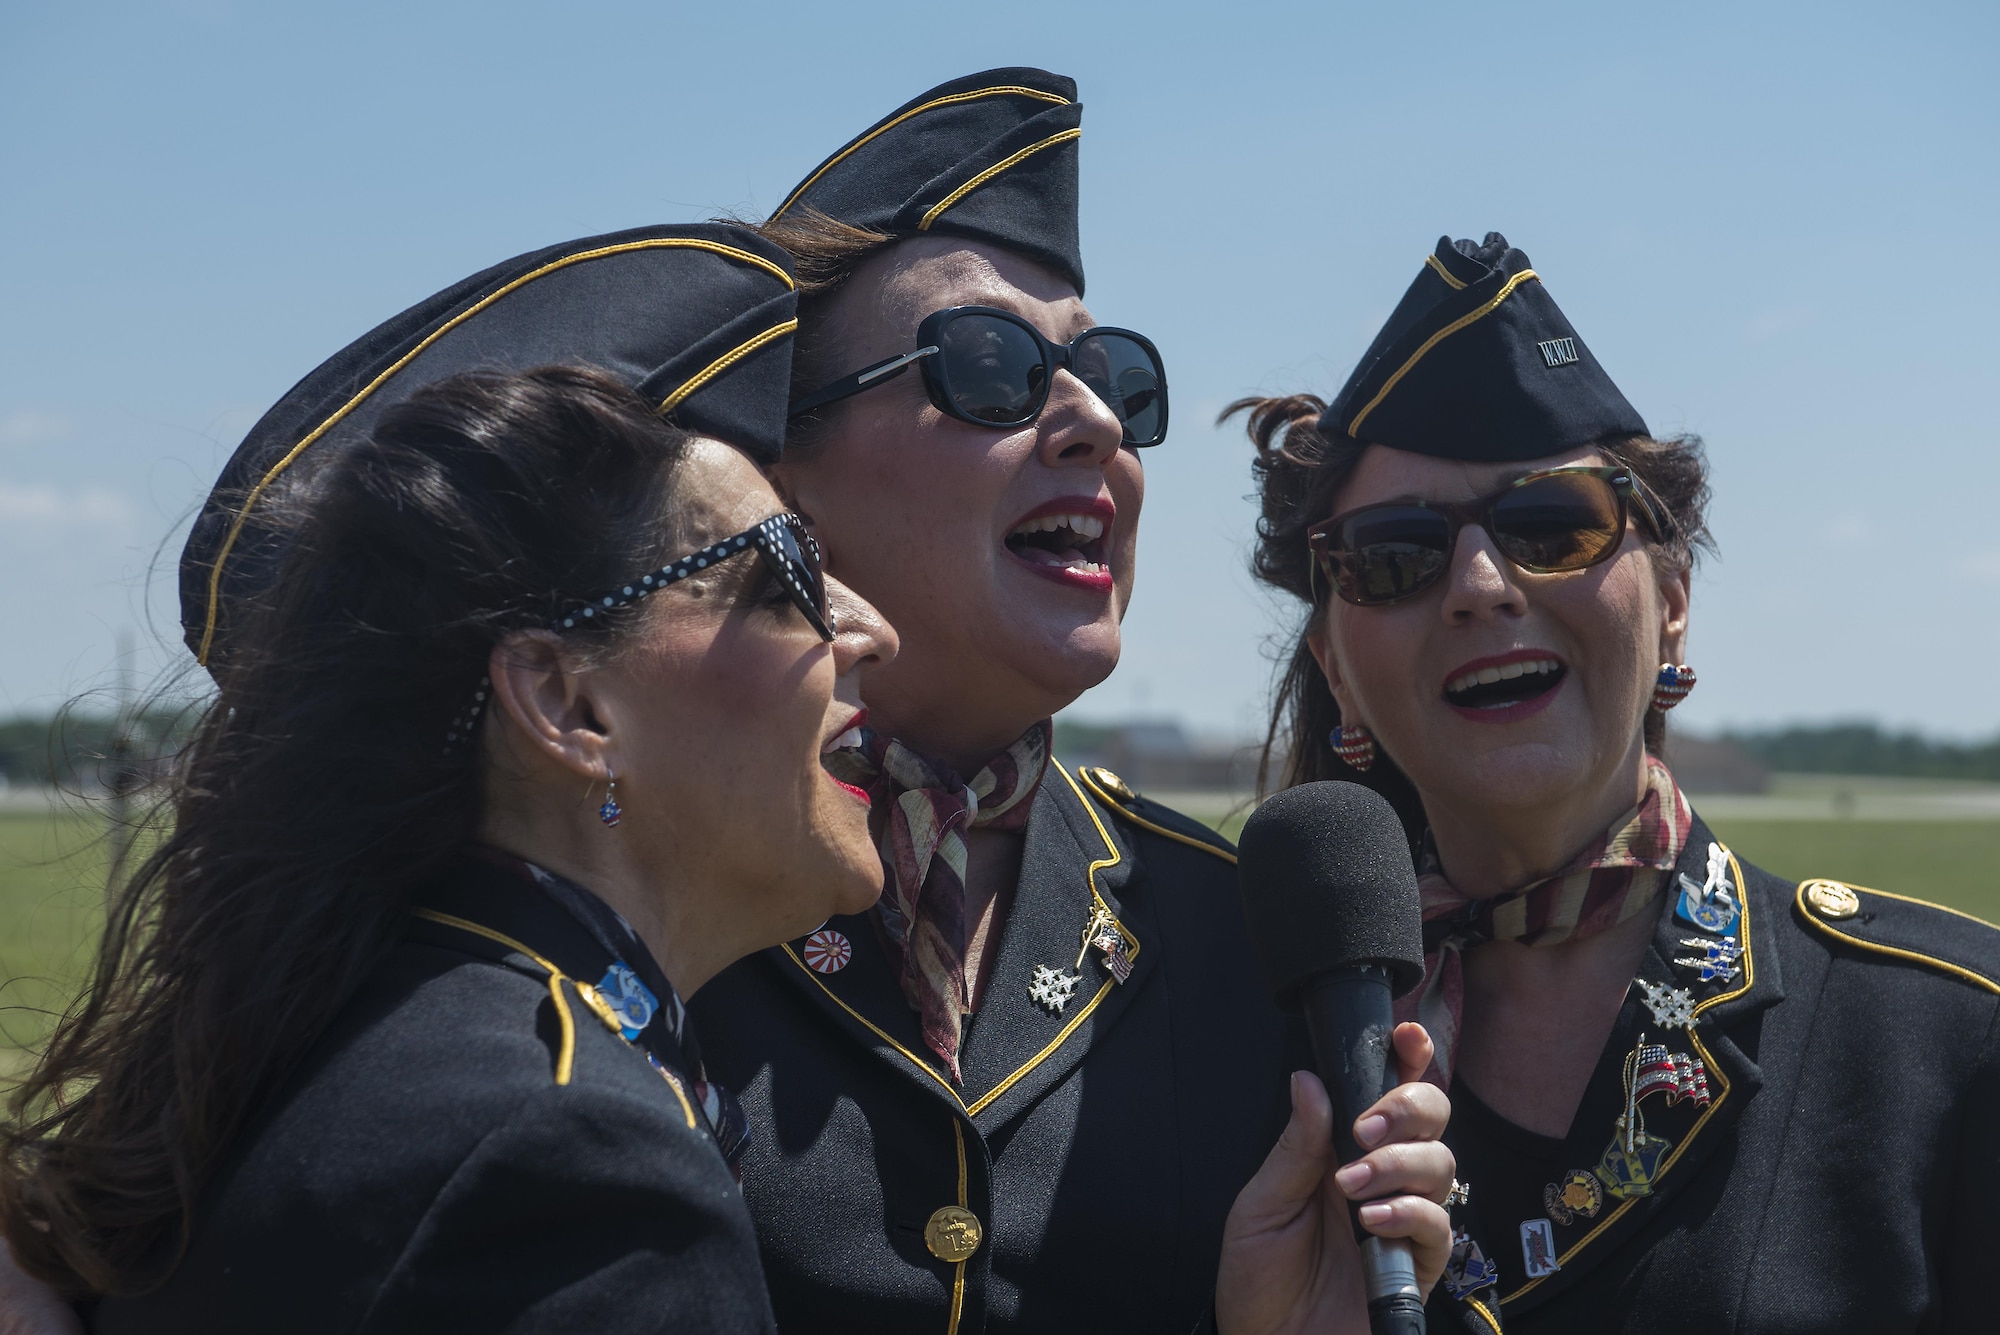 The Ladies for Liberty perform the national anthem during the Scott Airshow and Open House at Scott Air Force Base, Ill., June 11, 2017. Ladies for Liberty is a singing troupe dedicated to performing the Andrew Sisters style of music through their own rendition of vocals, costumes, hairstyles, and the spirit of patriotism reminiscent of the 1940s. (U.S. Air Force photo by Tech. Sgt. Jonathan Fowler)